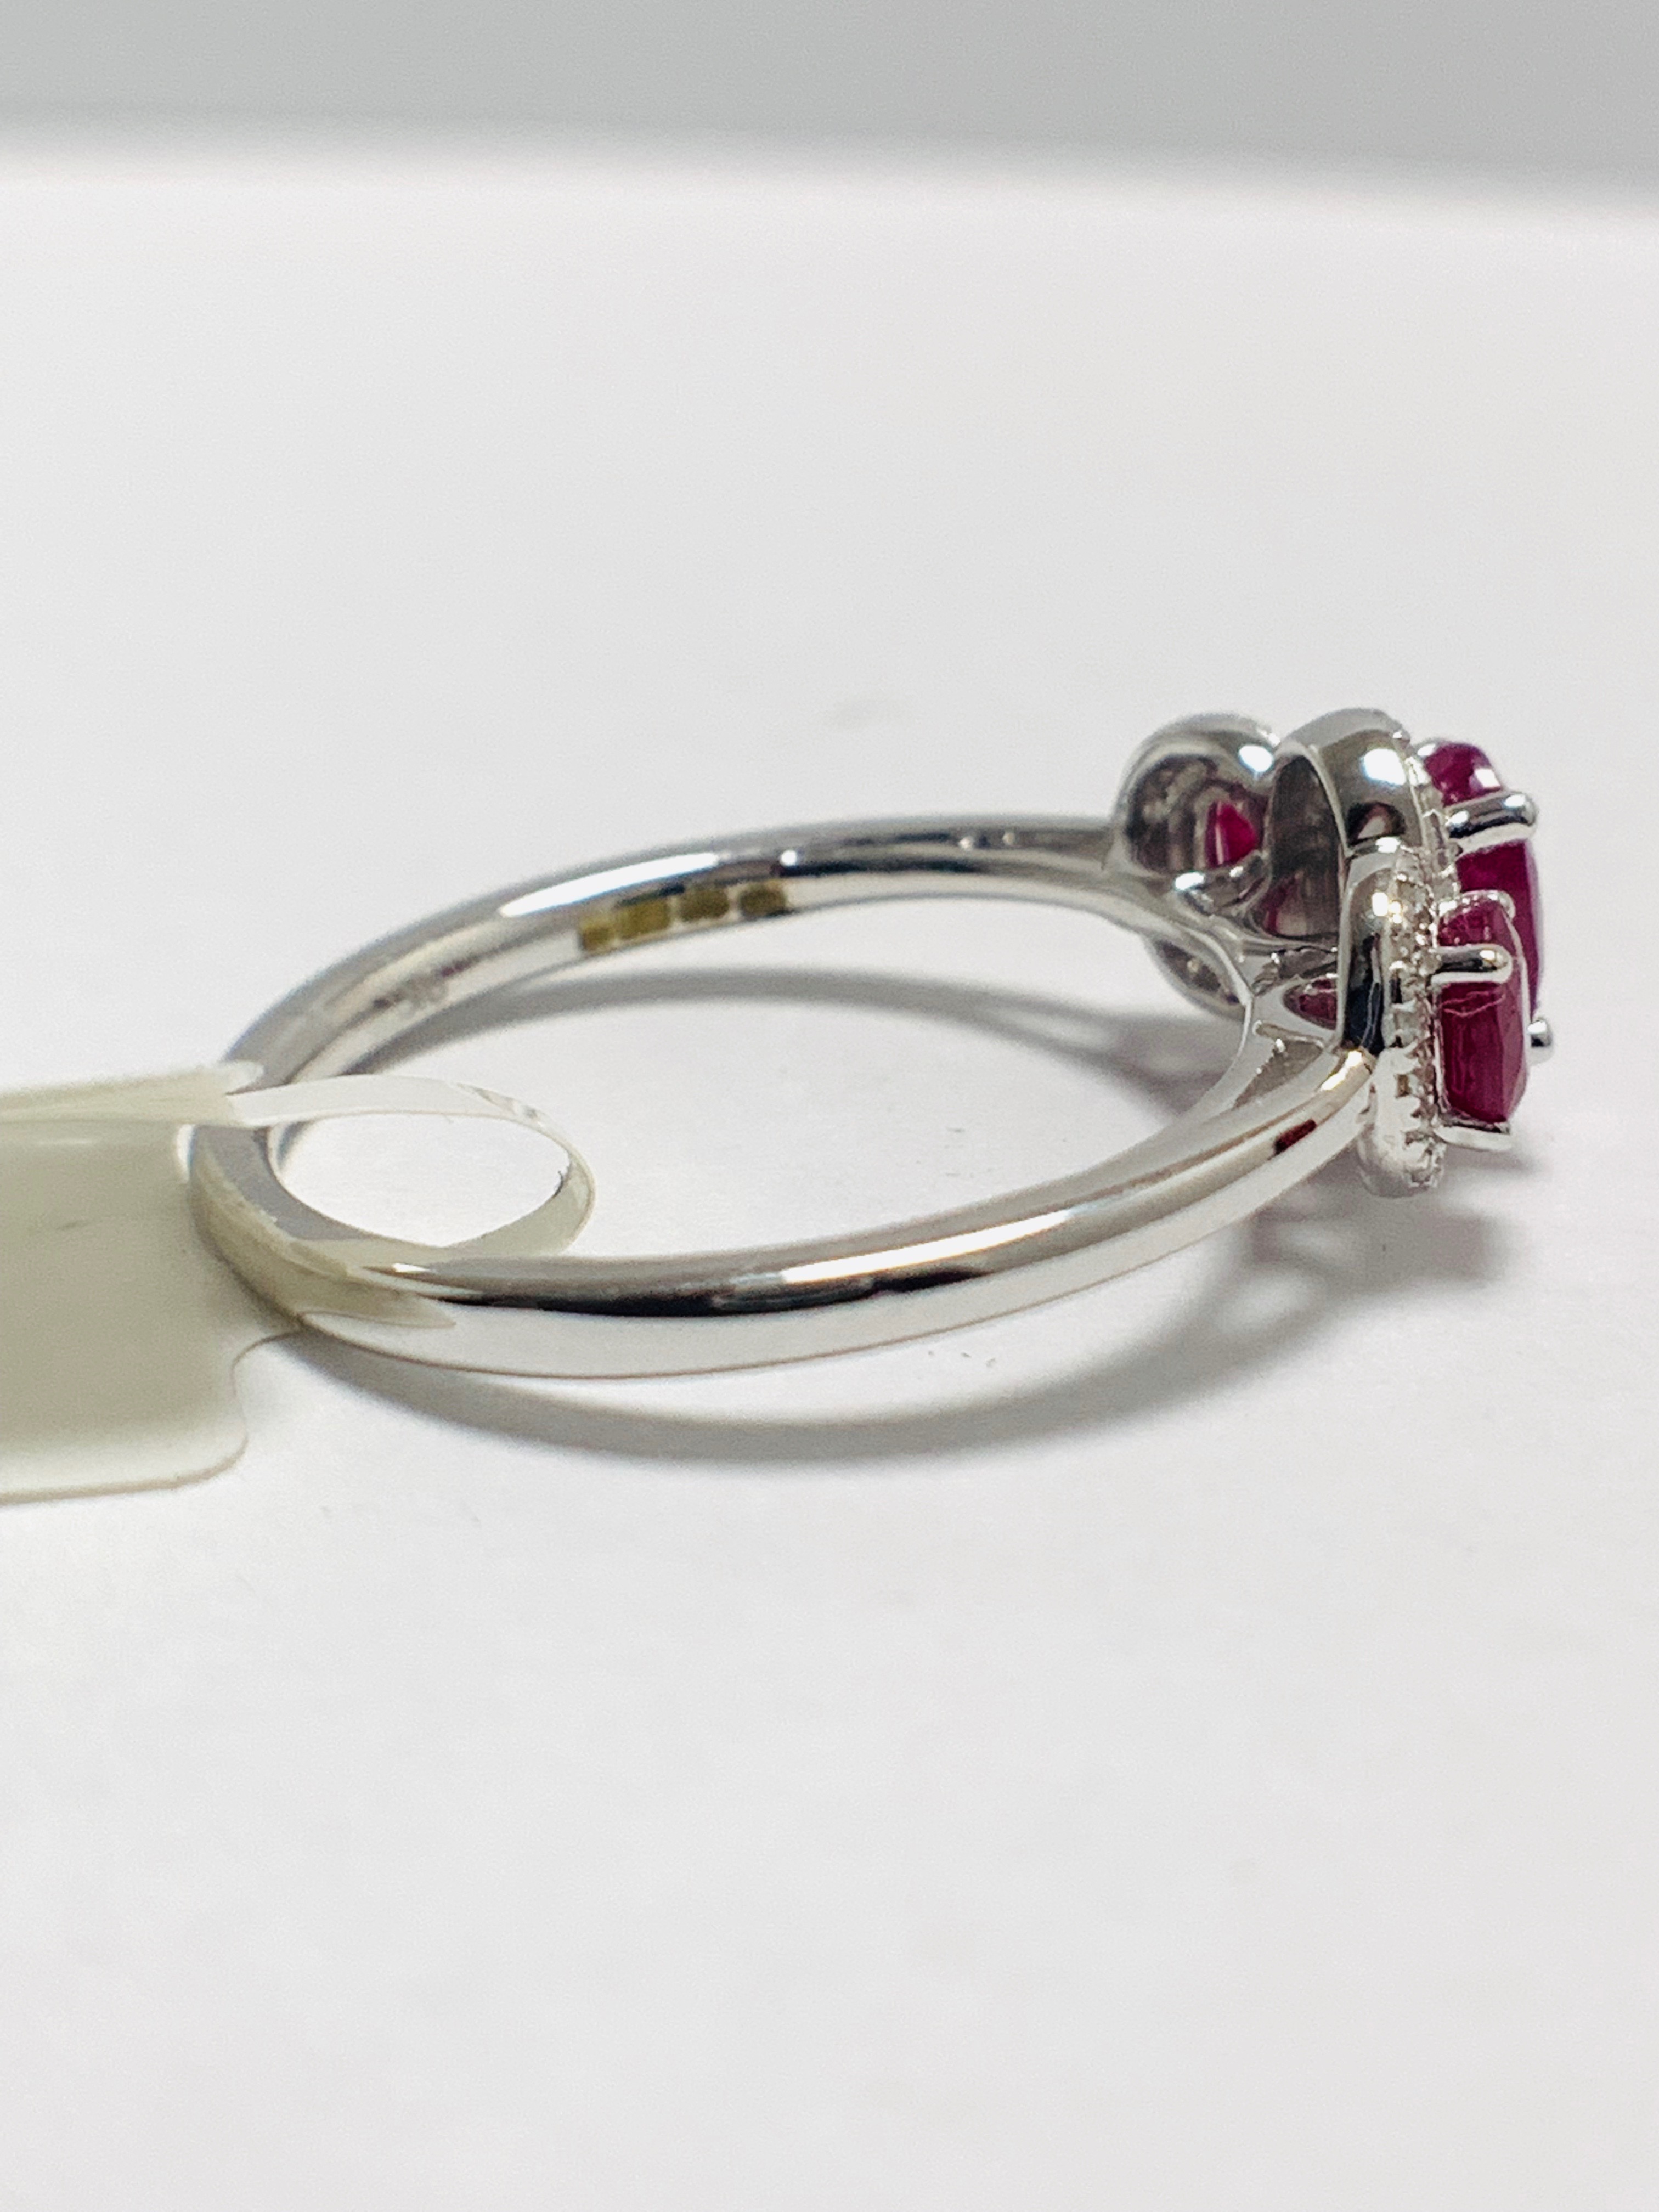 9ct white Gold Ruby trilogy style ring - Image 5 of 8